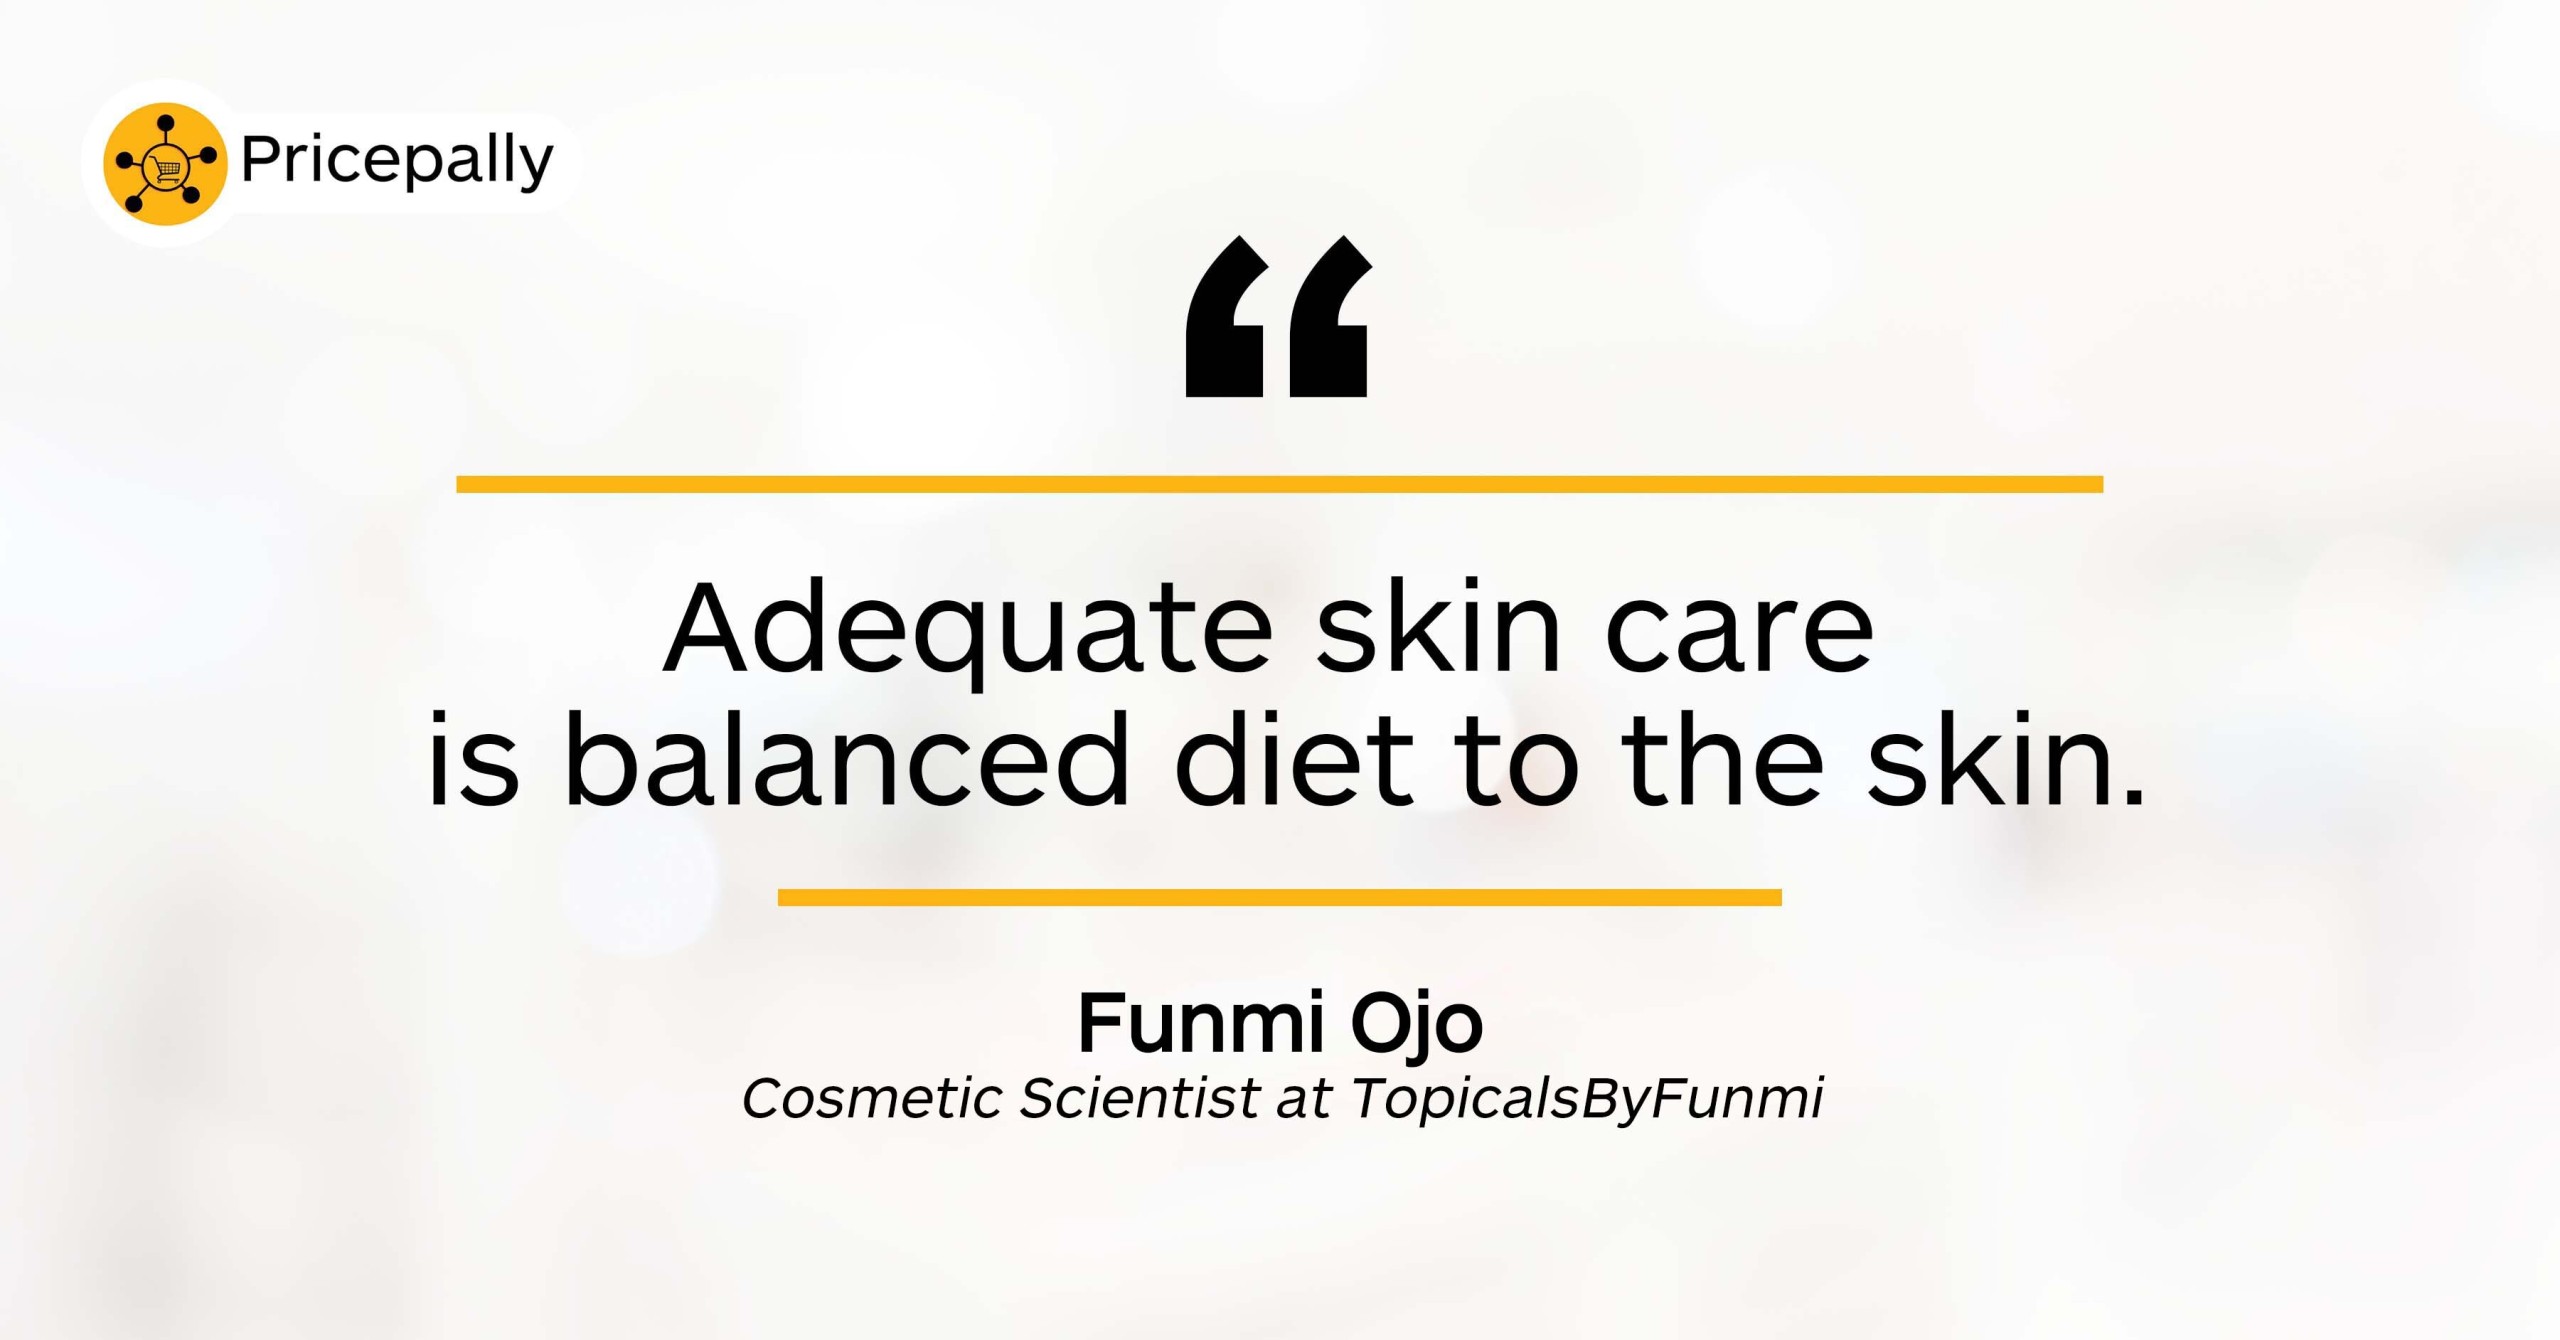 "Adequate skin care is balanced diet to the skin"